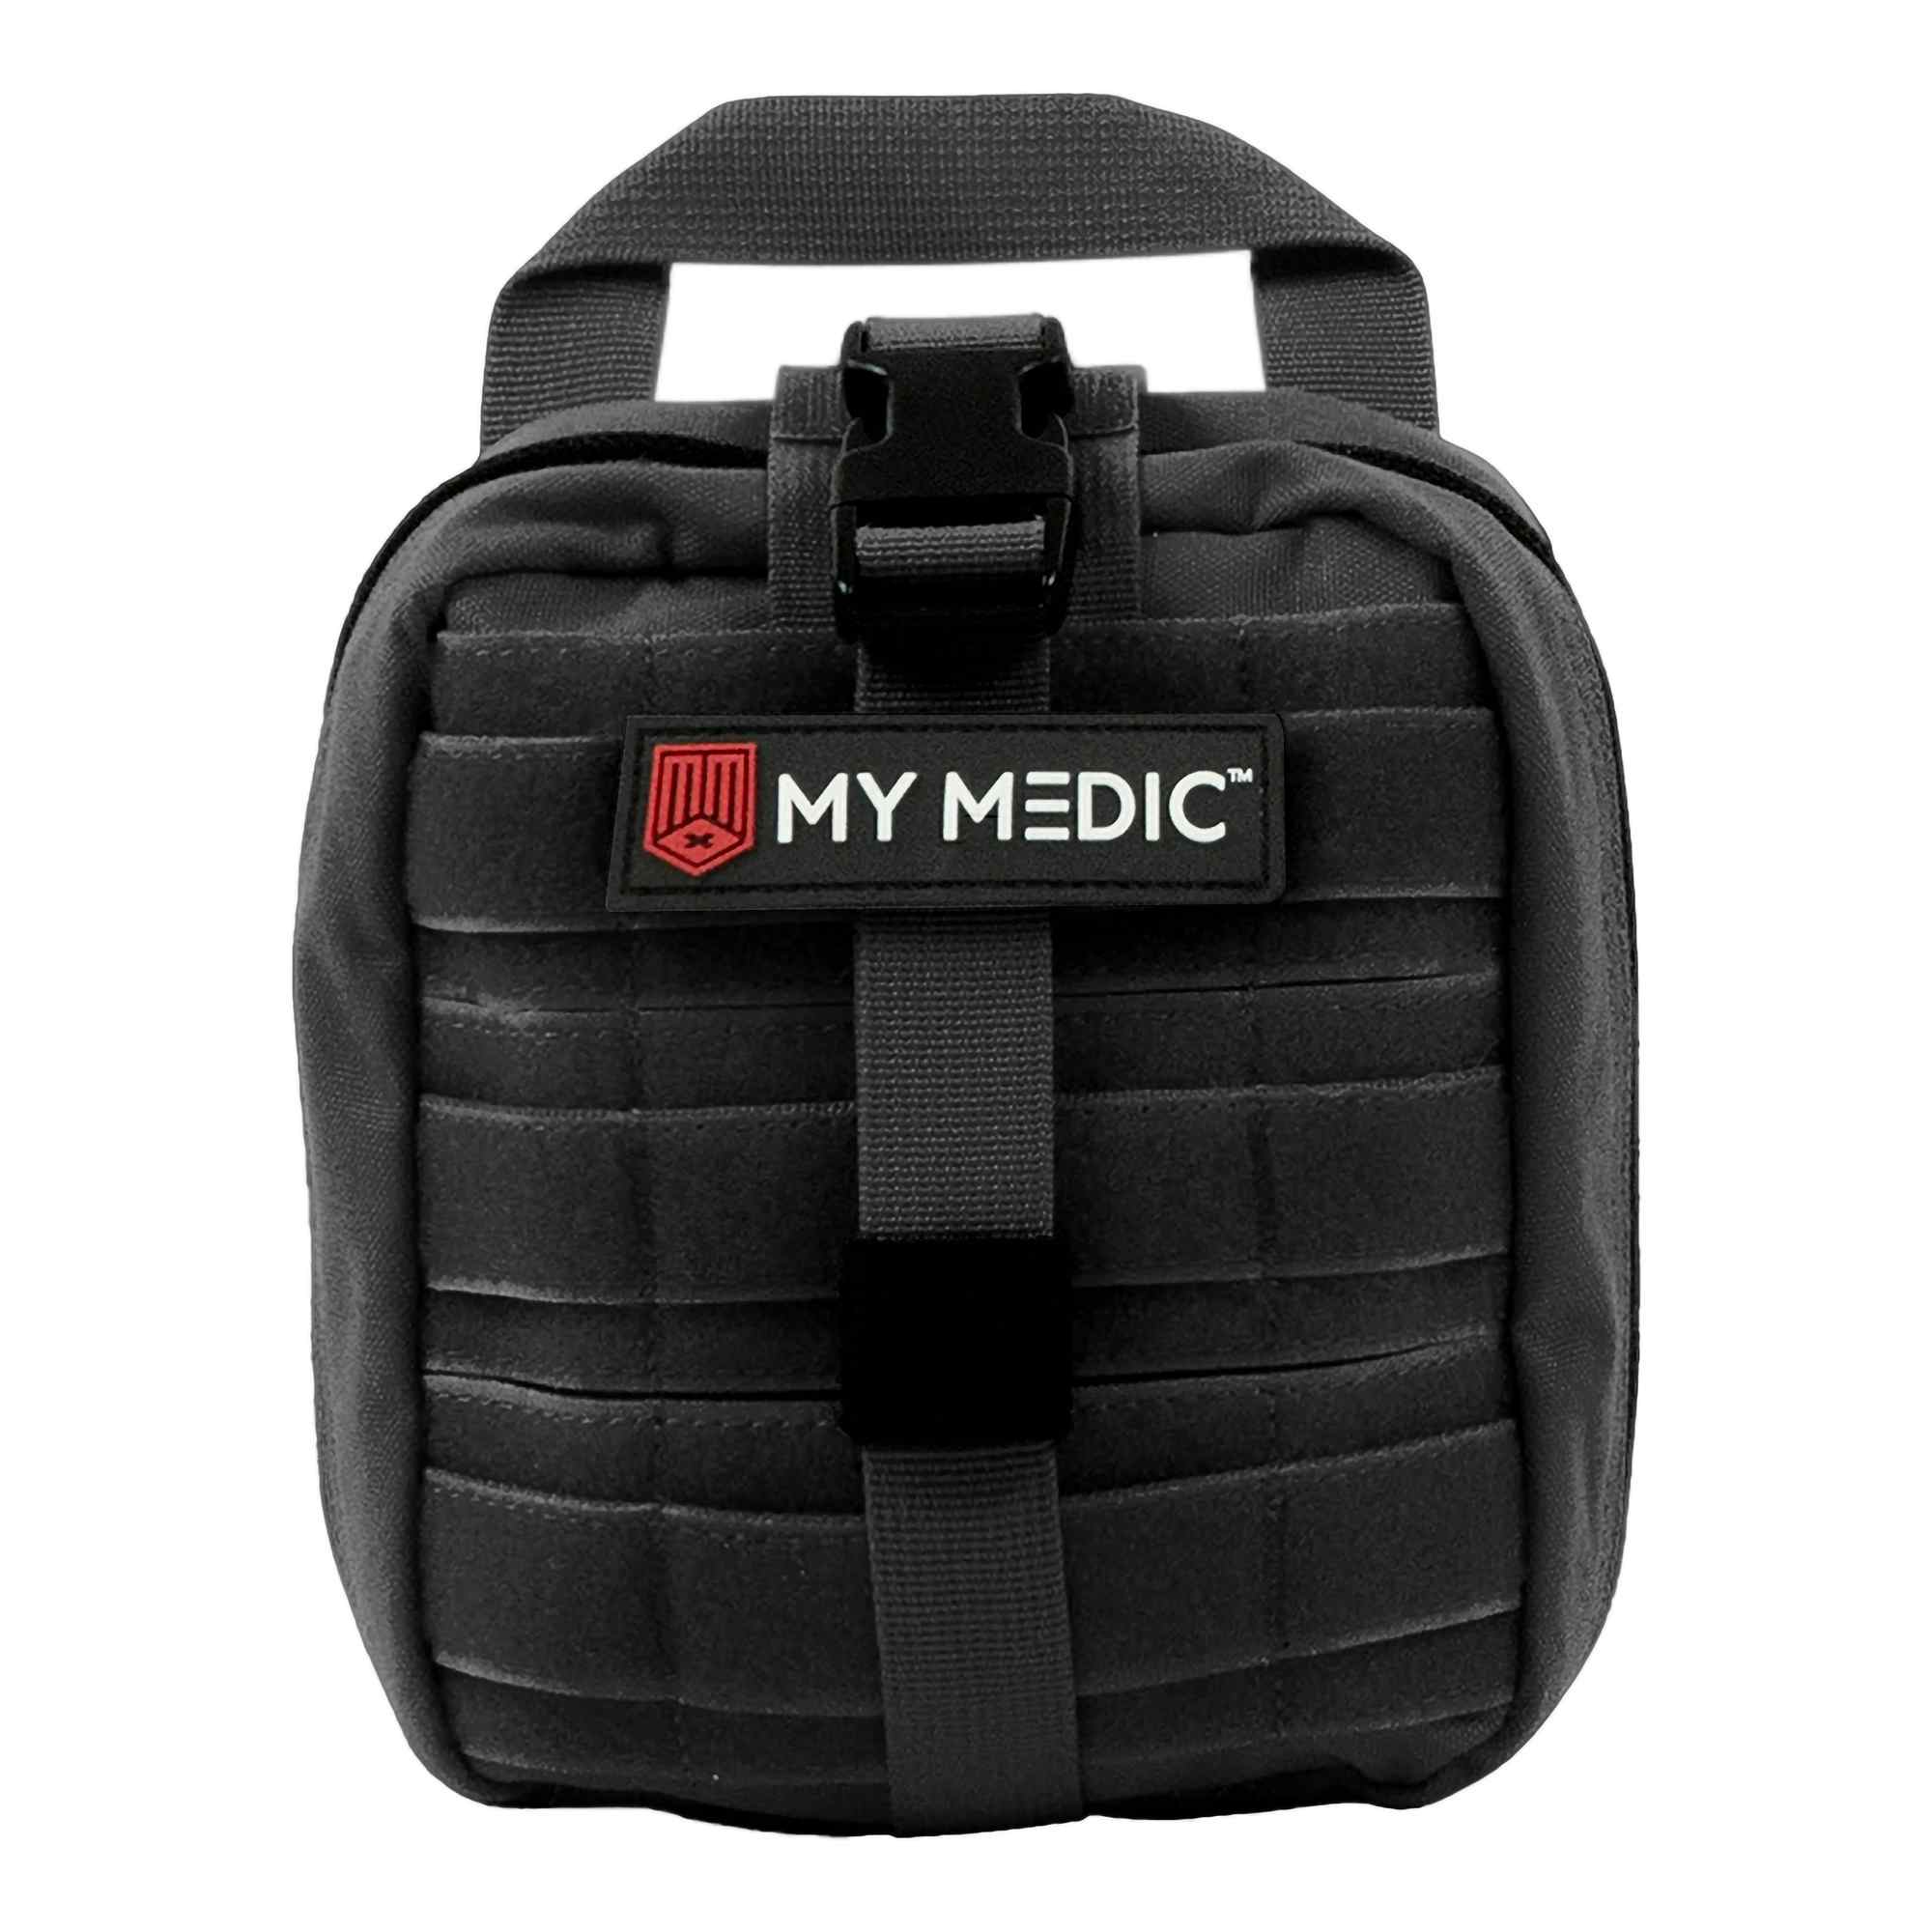 My Medic MYFAK Clearance Legacy First Aid Kit